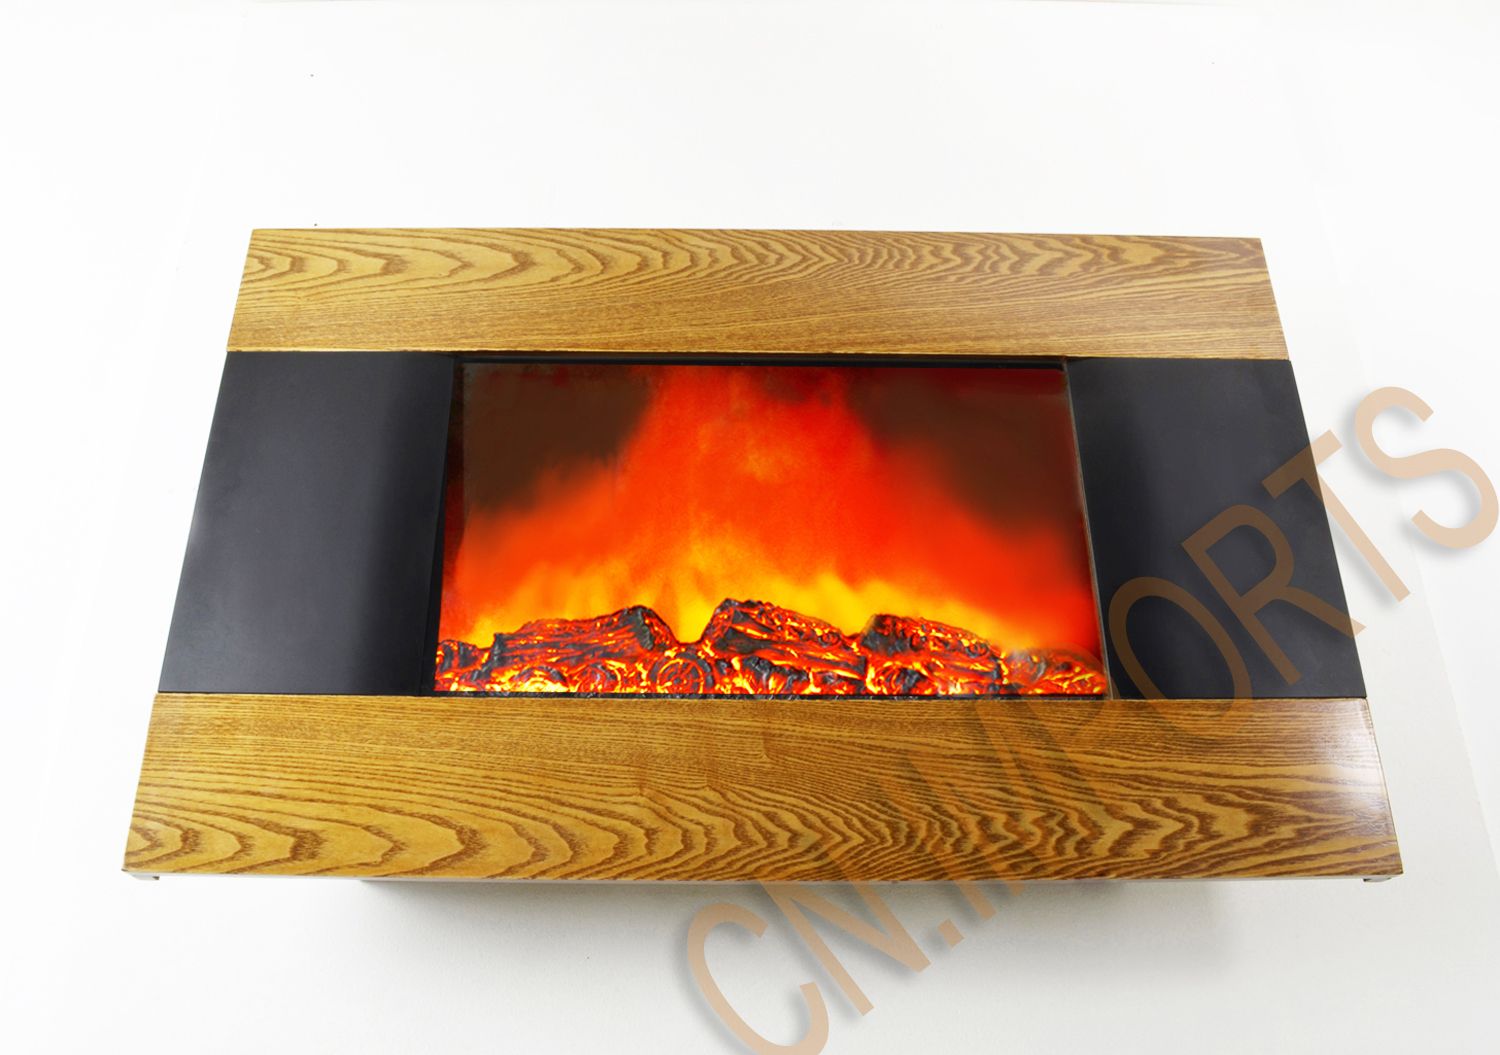  Mounted Wood Trim Panel Electric Fireplace Heater with Logs C510AL